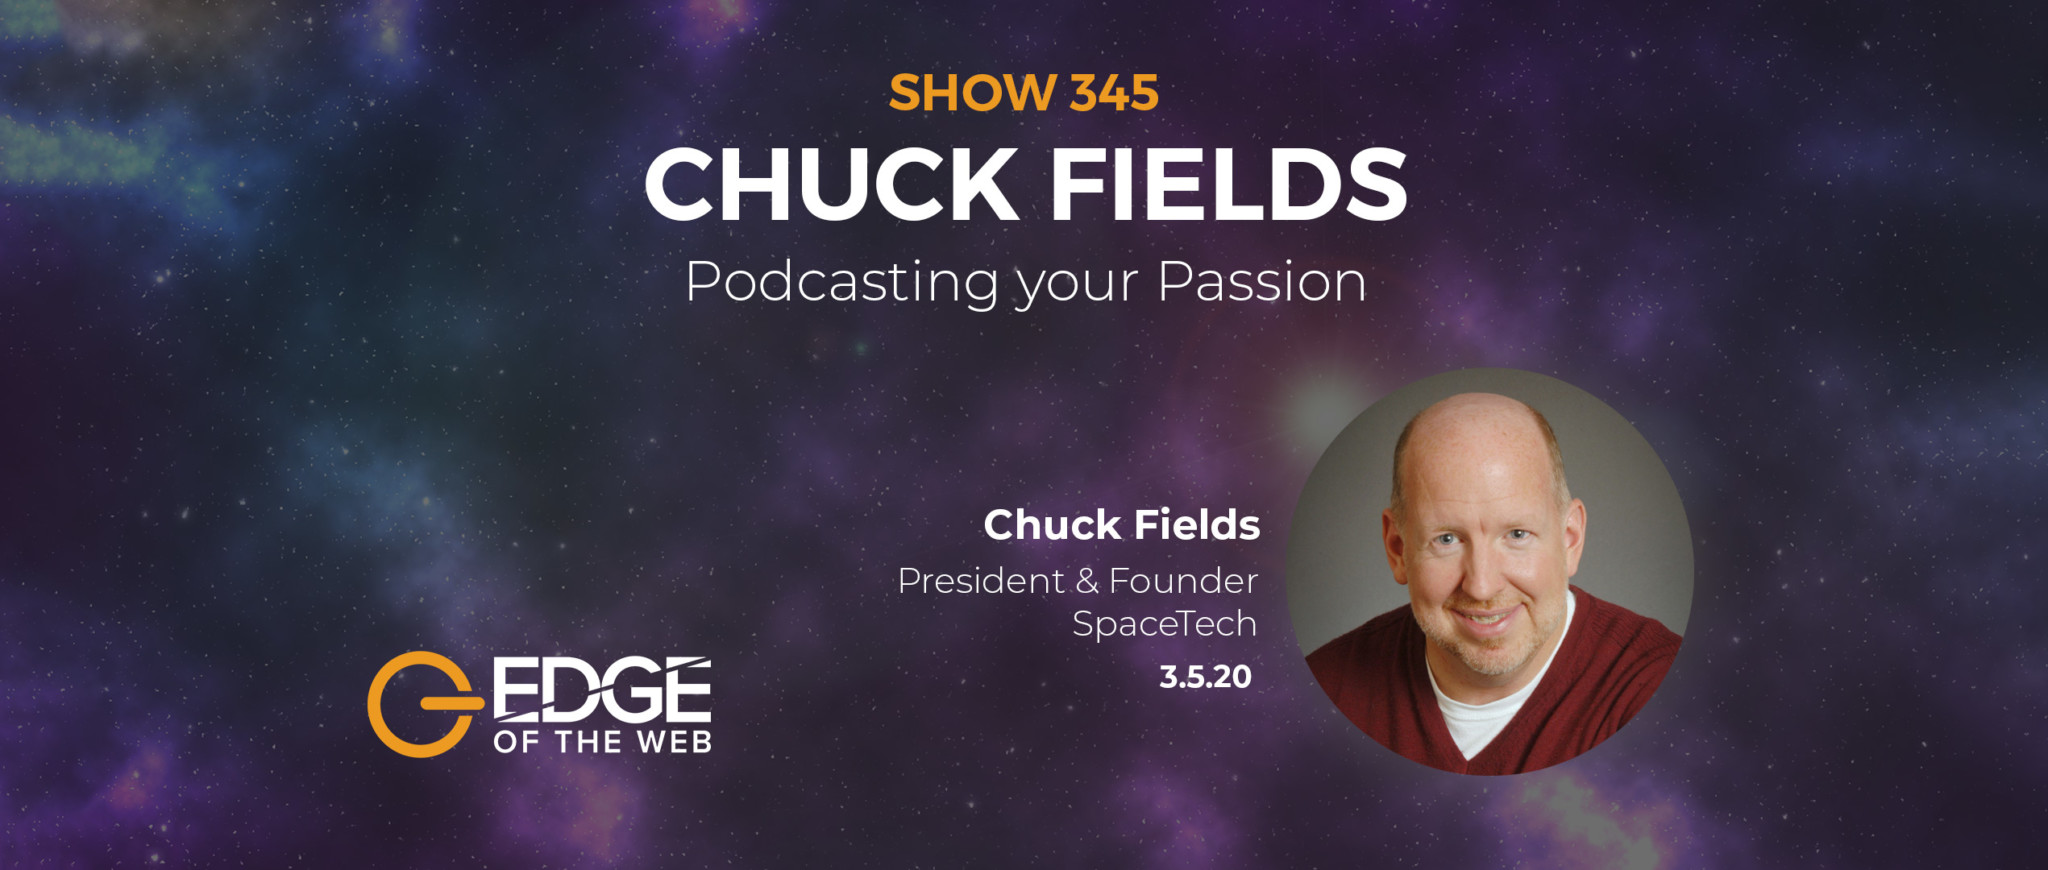 EP 345: Podcasting Your Passion with Chuck Fields